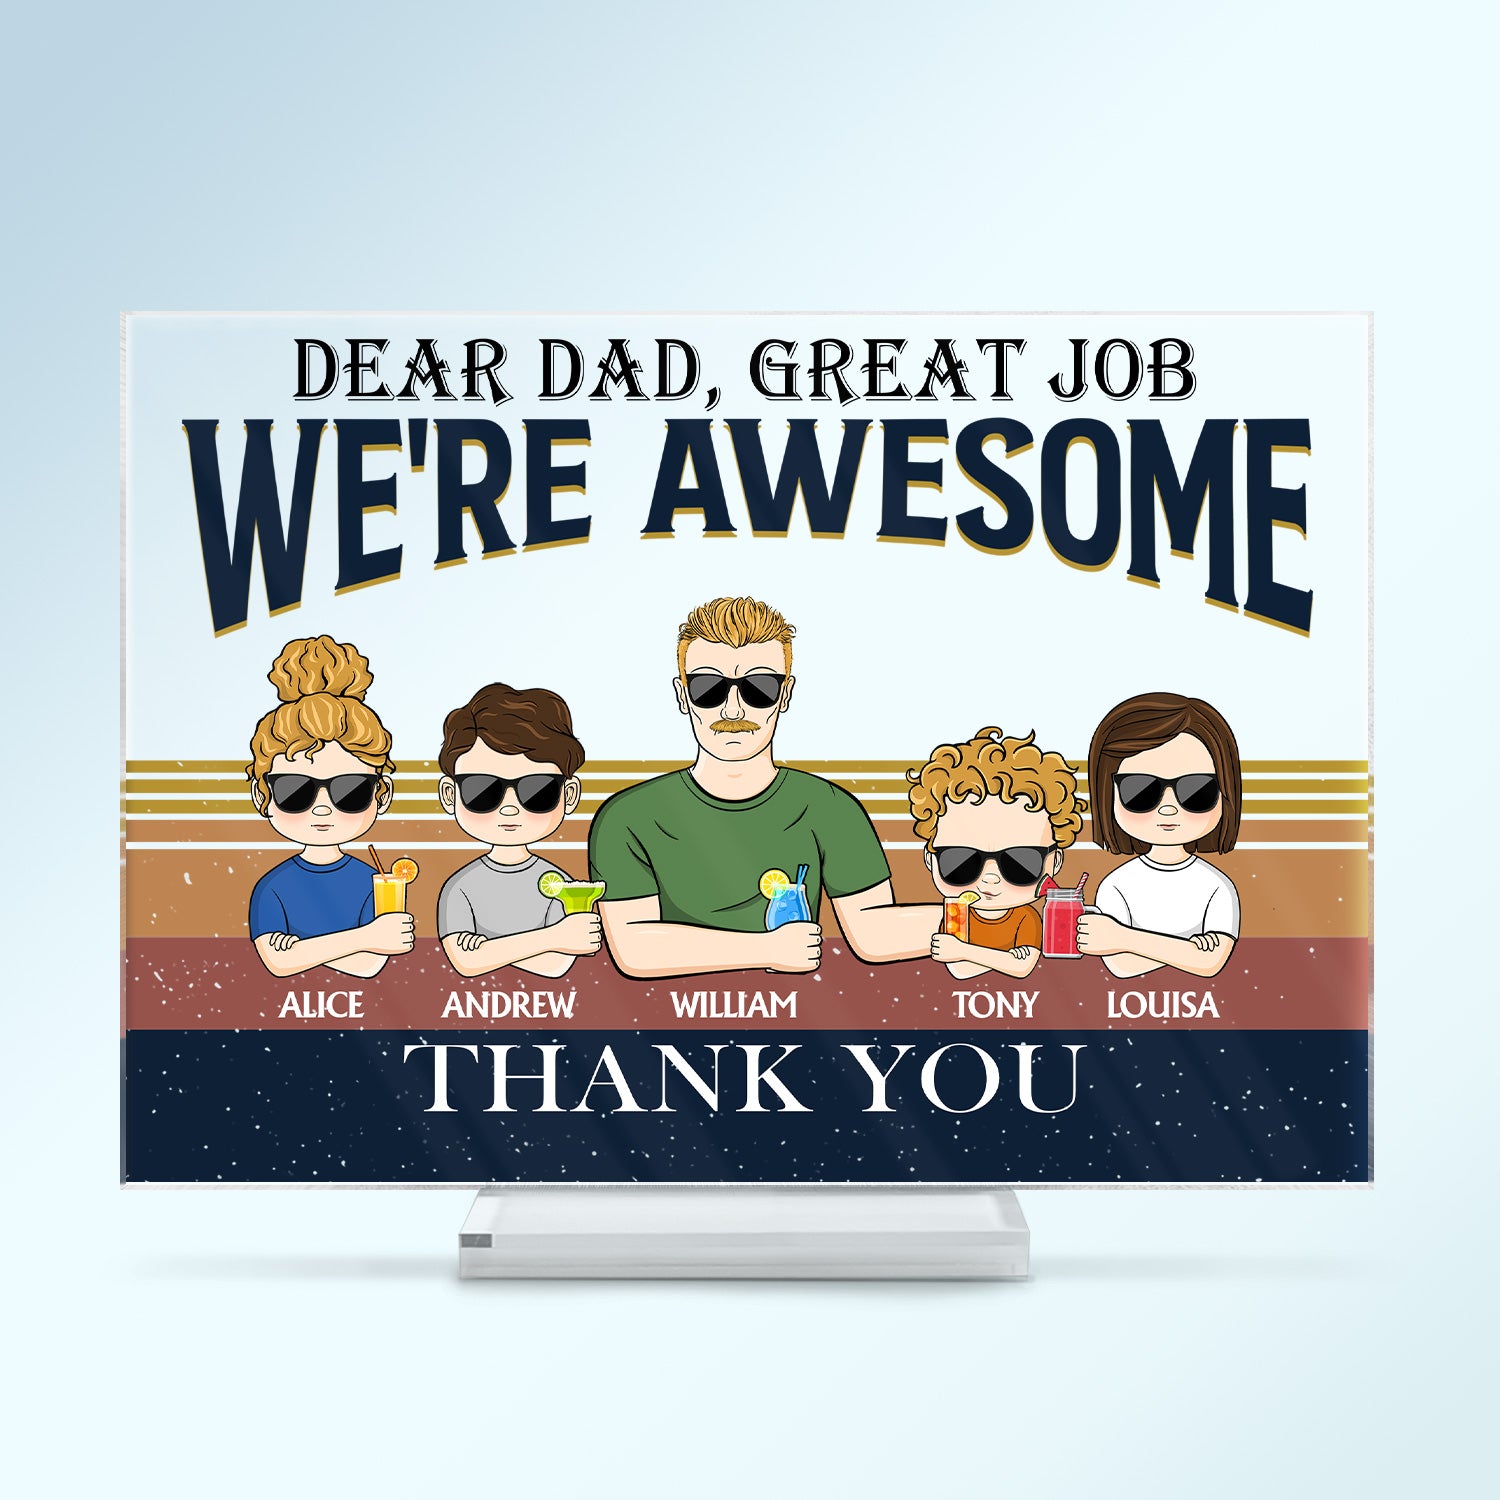 Dear Dad Great Job Thank You Young - Birthday, Loving Gift For Father, Grandpa, Grandfather - Personalized Custom Horizontal Rectangle Acrylic Plaque